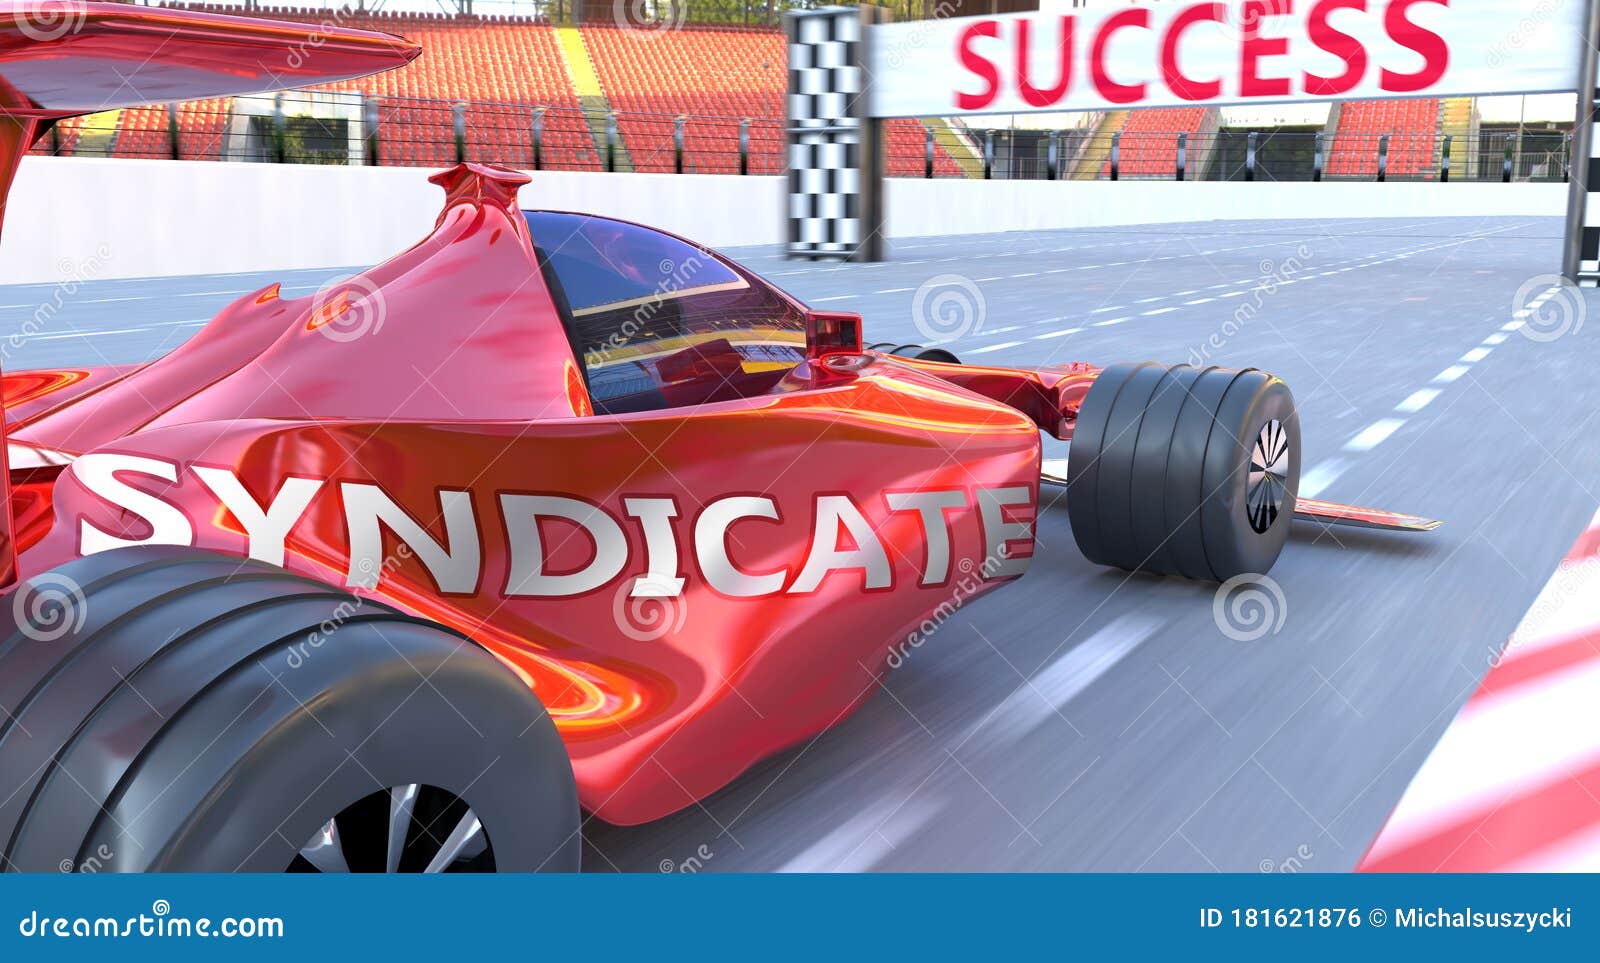 syndicate and success - pictured as word syndicate and a f1 car, to ize that syndicate can help achieving success and